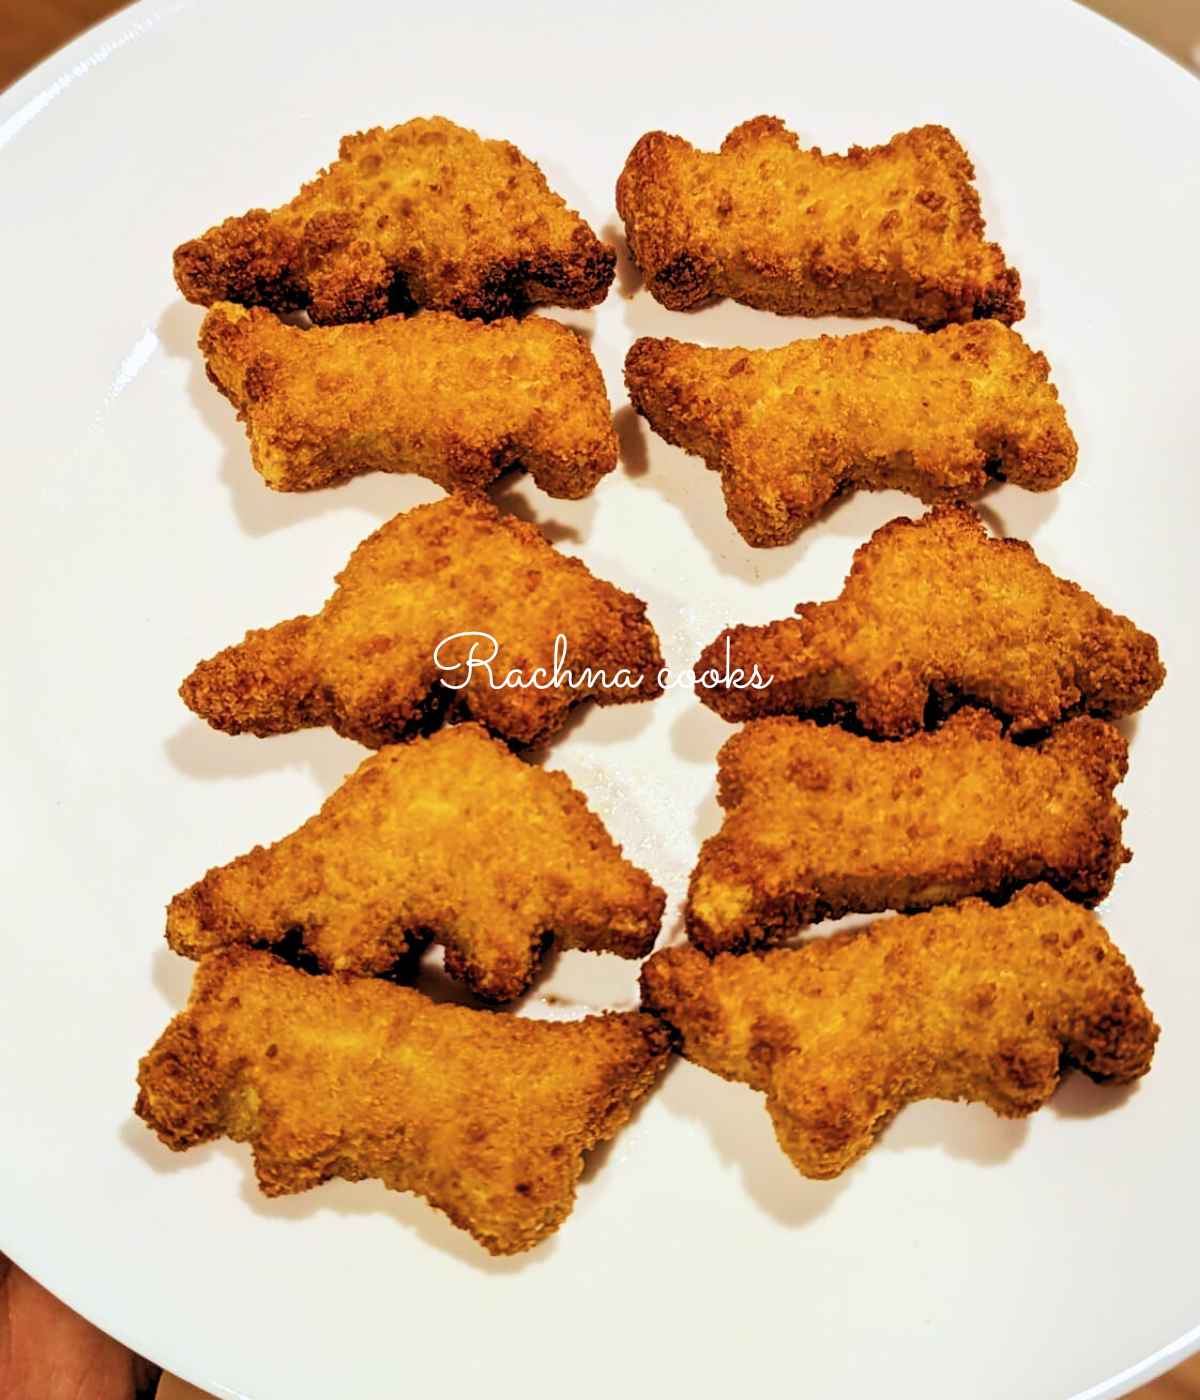 Dino nuggets after air frying served on a white plate.